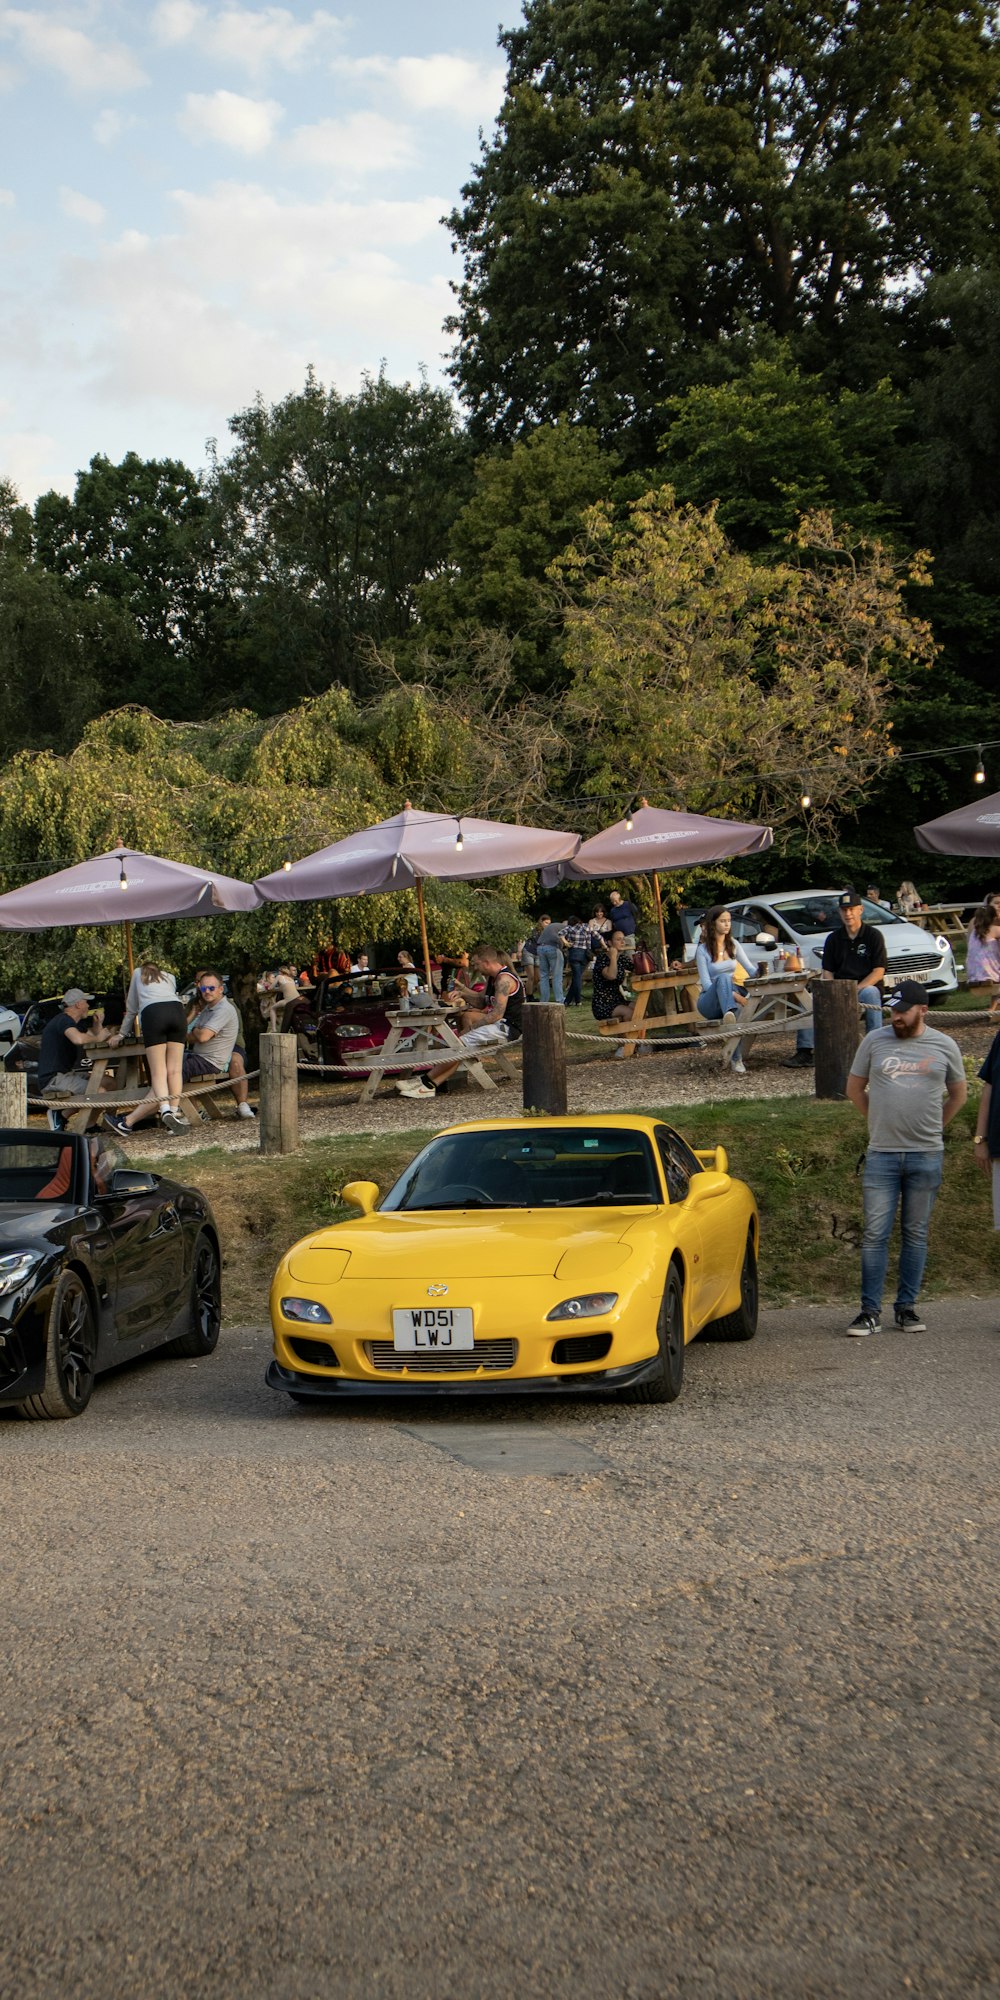 a yellow sports car parked in front of a crowd of people